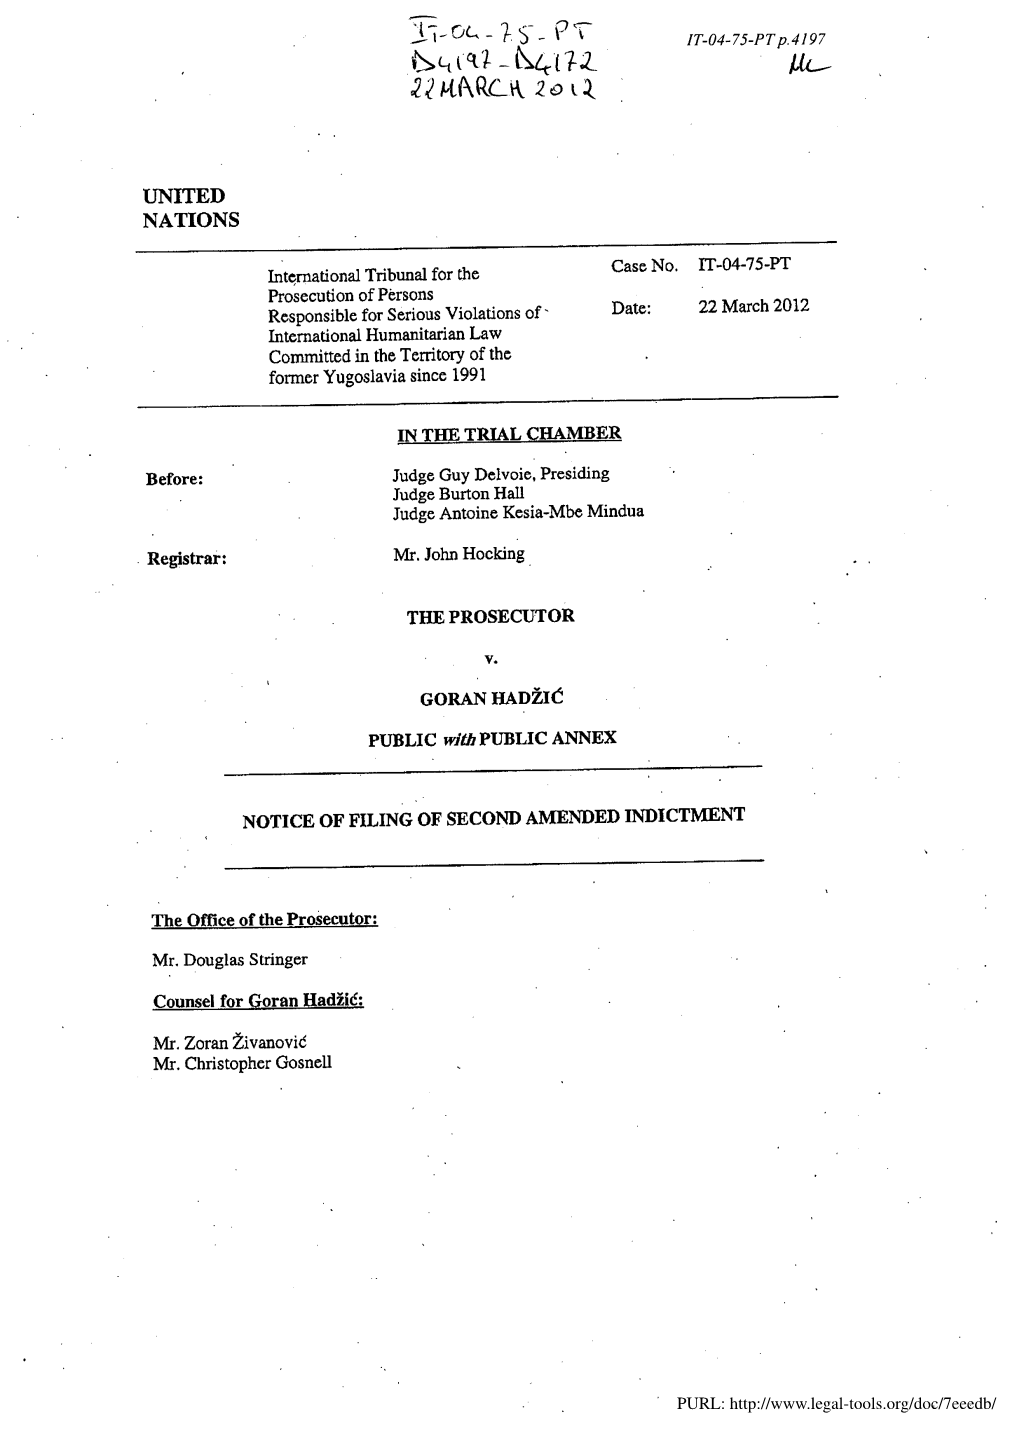 Notice of Filing of Second Amended Indictment